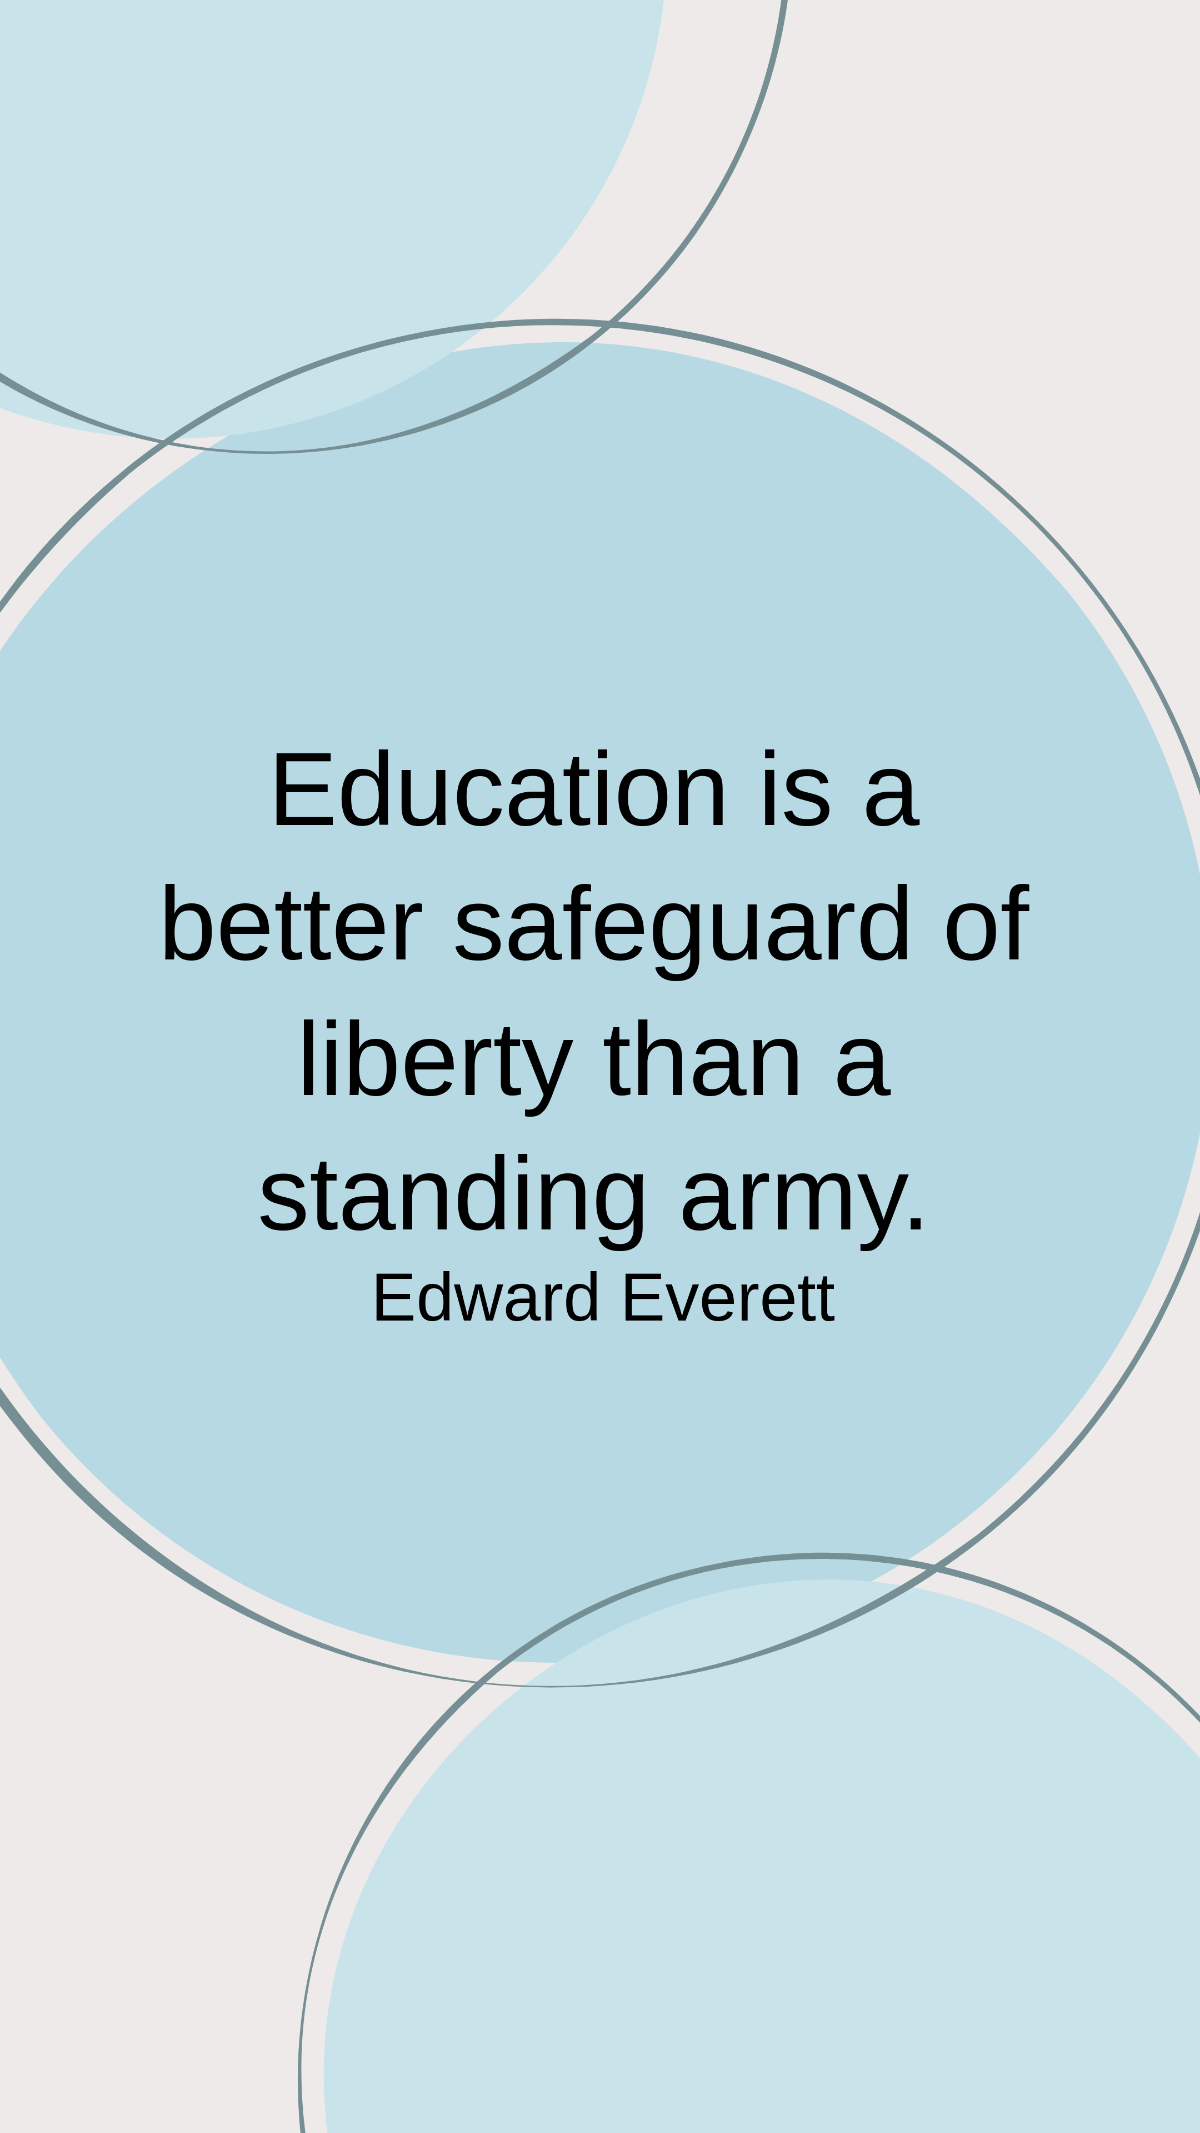 Edward Everett - Education is a better safeguard of liberty than a standing army. Template